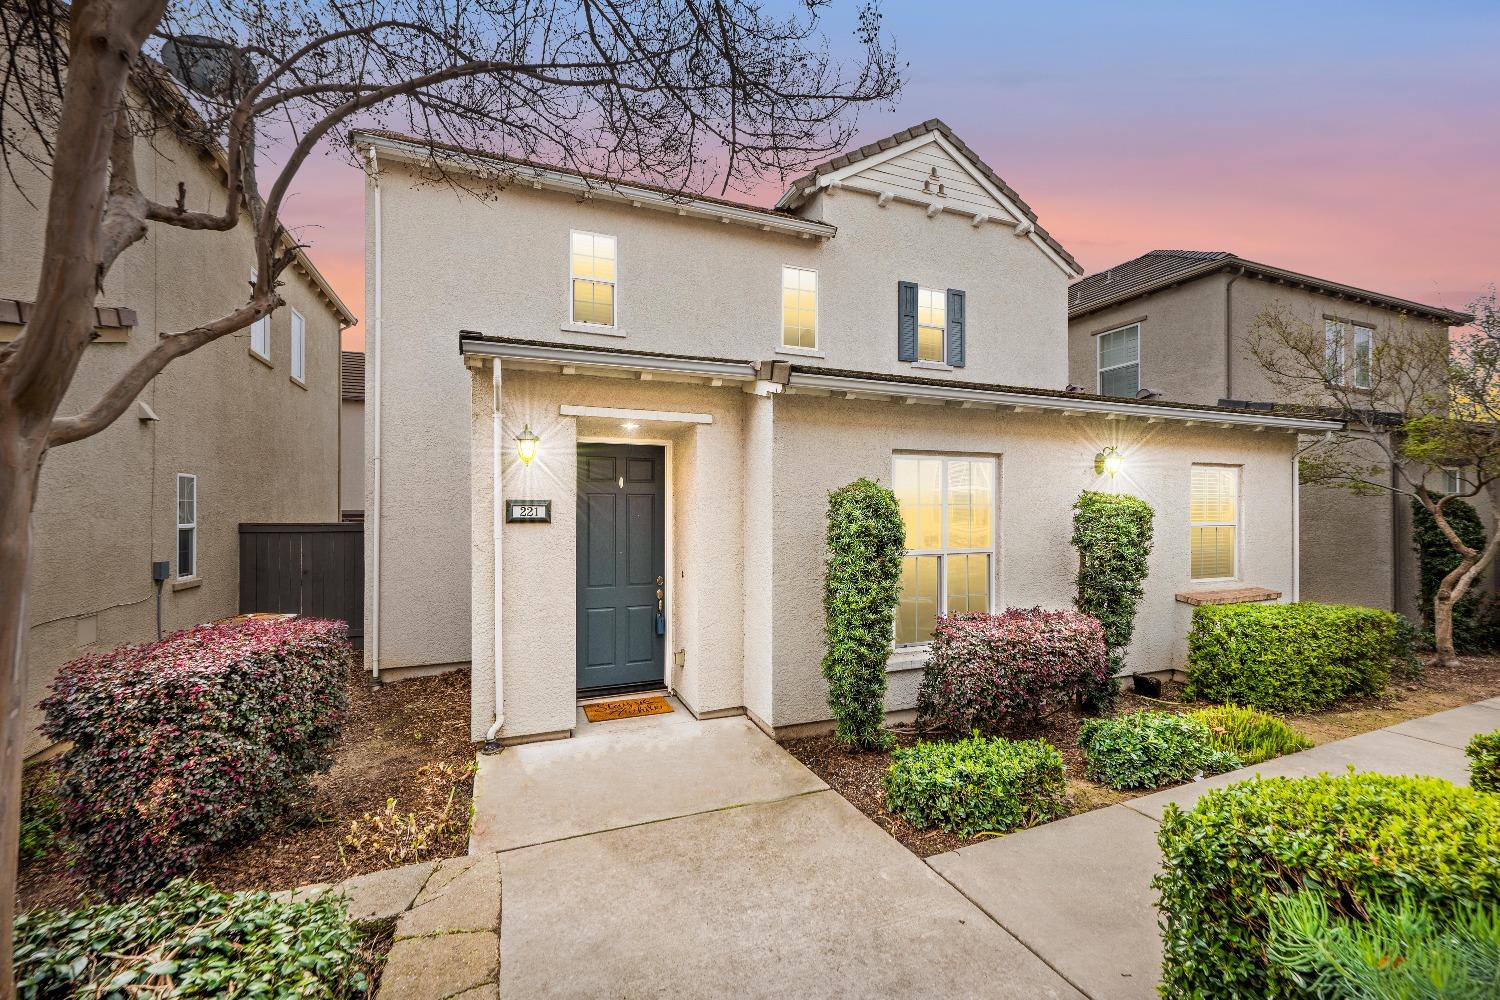 Photo of 221 Chambord Wy #221 in Roseville, CA